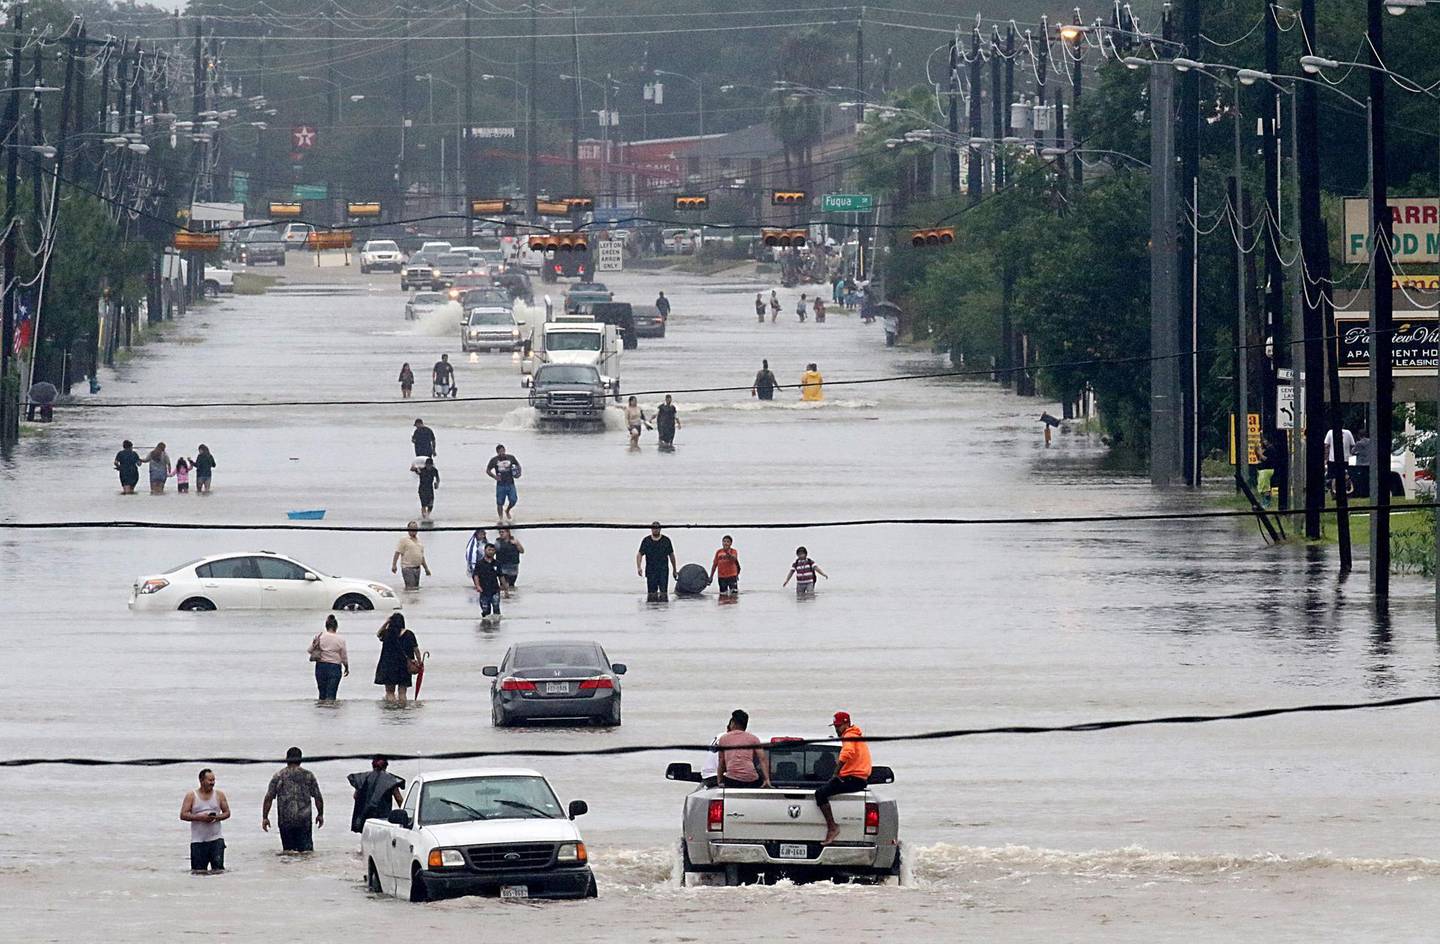 (FILES) This file photo taken on August 27, 2017 shows people walking through the flooded waters of Telephone Rd. in Houston battled with tropical storm Harvey and resulting floods.
Fierce hurricanes, heat waves, floods and wildfires ravaged the planet in 2017, as scientists said the role of climate change in causing or worsening certain natural disasters has grown increasingly clear. It was also the year the world's second largest polluter, the United States, turned its back on the 196-nation Paris climate deal meant to limit global warming to under two degrees Celsius (1.5 degrees Fahrenheit) over pre-industrial levels.
 / AFP PHOTO / Thomas B. Shea / With AFP Story by Kerry SHERDAN: Hurricanes, heat waves, fires ravaged planet in 2017